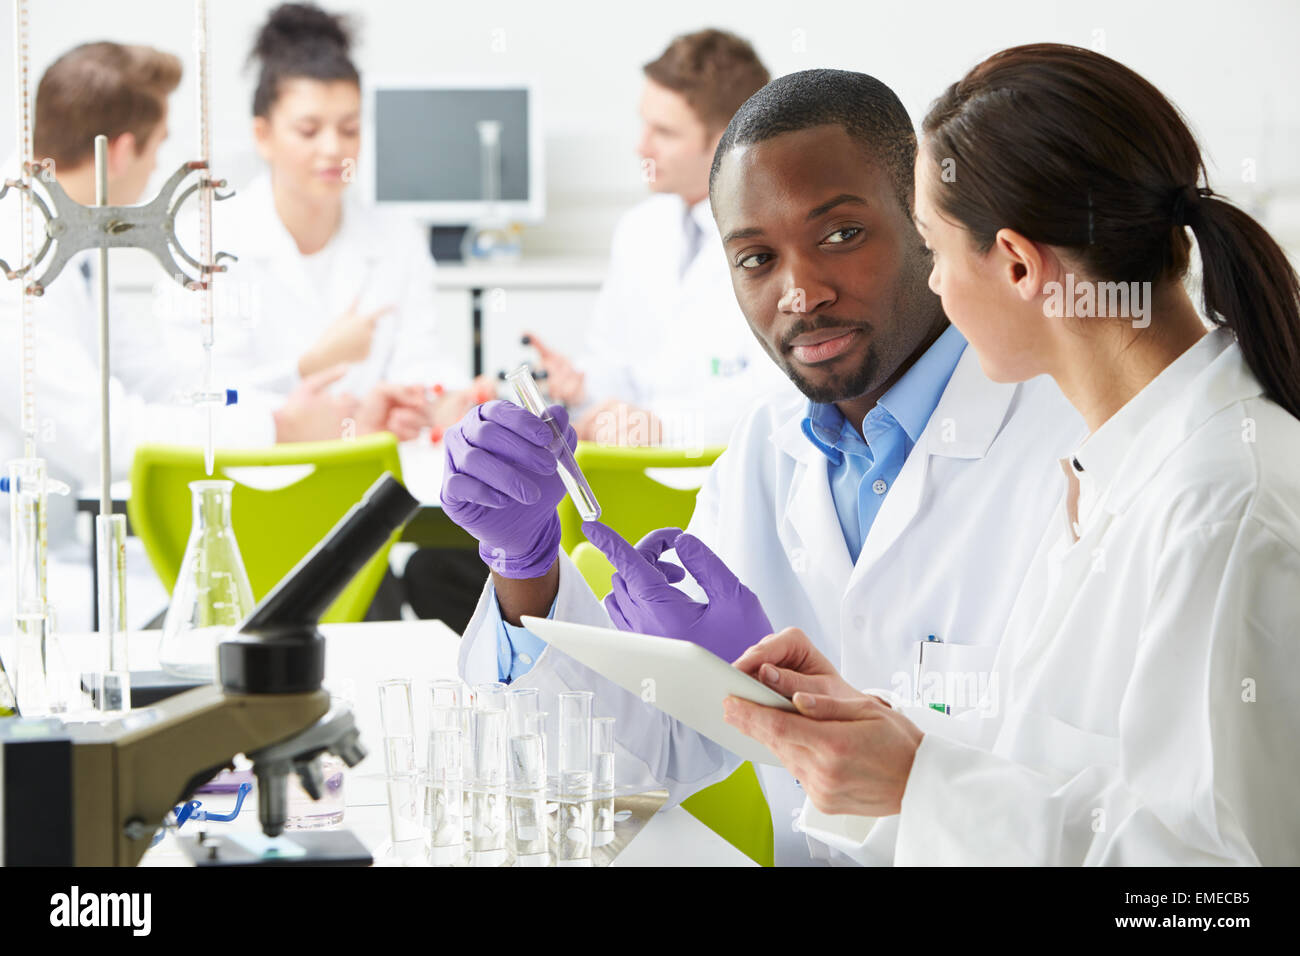 Group Of Technicians Working In Laboratory Stock Photo